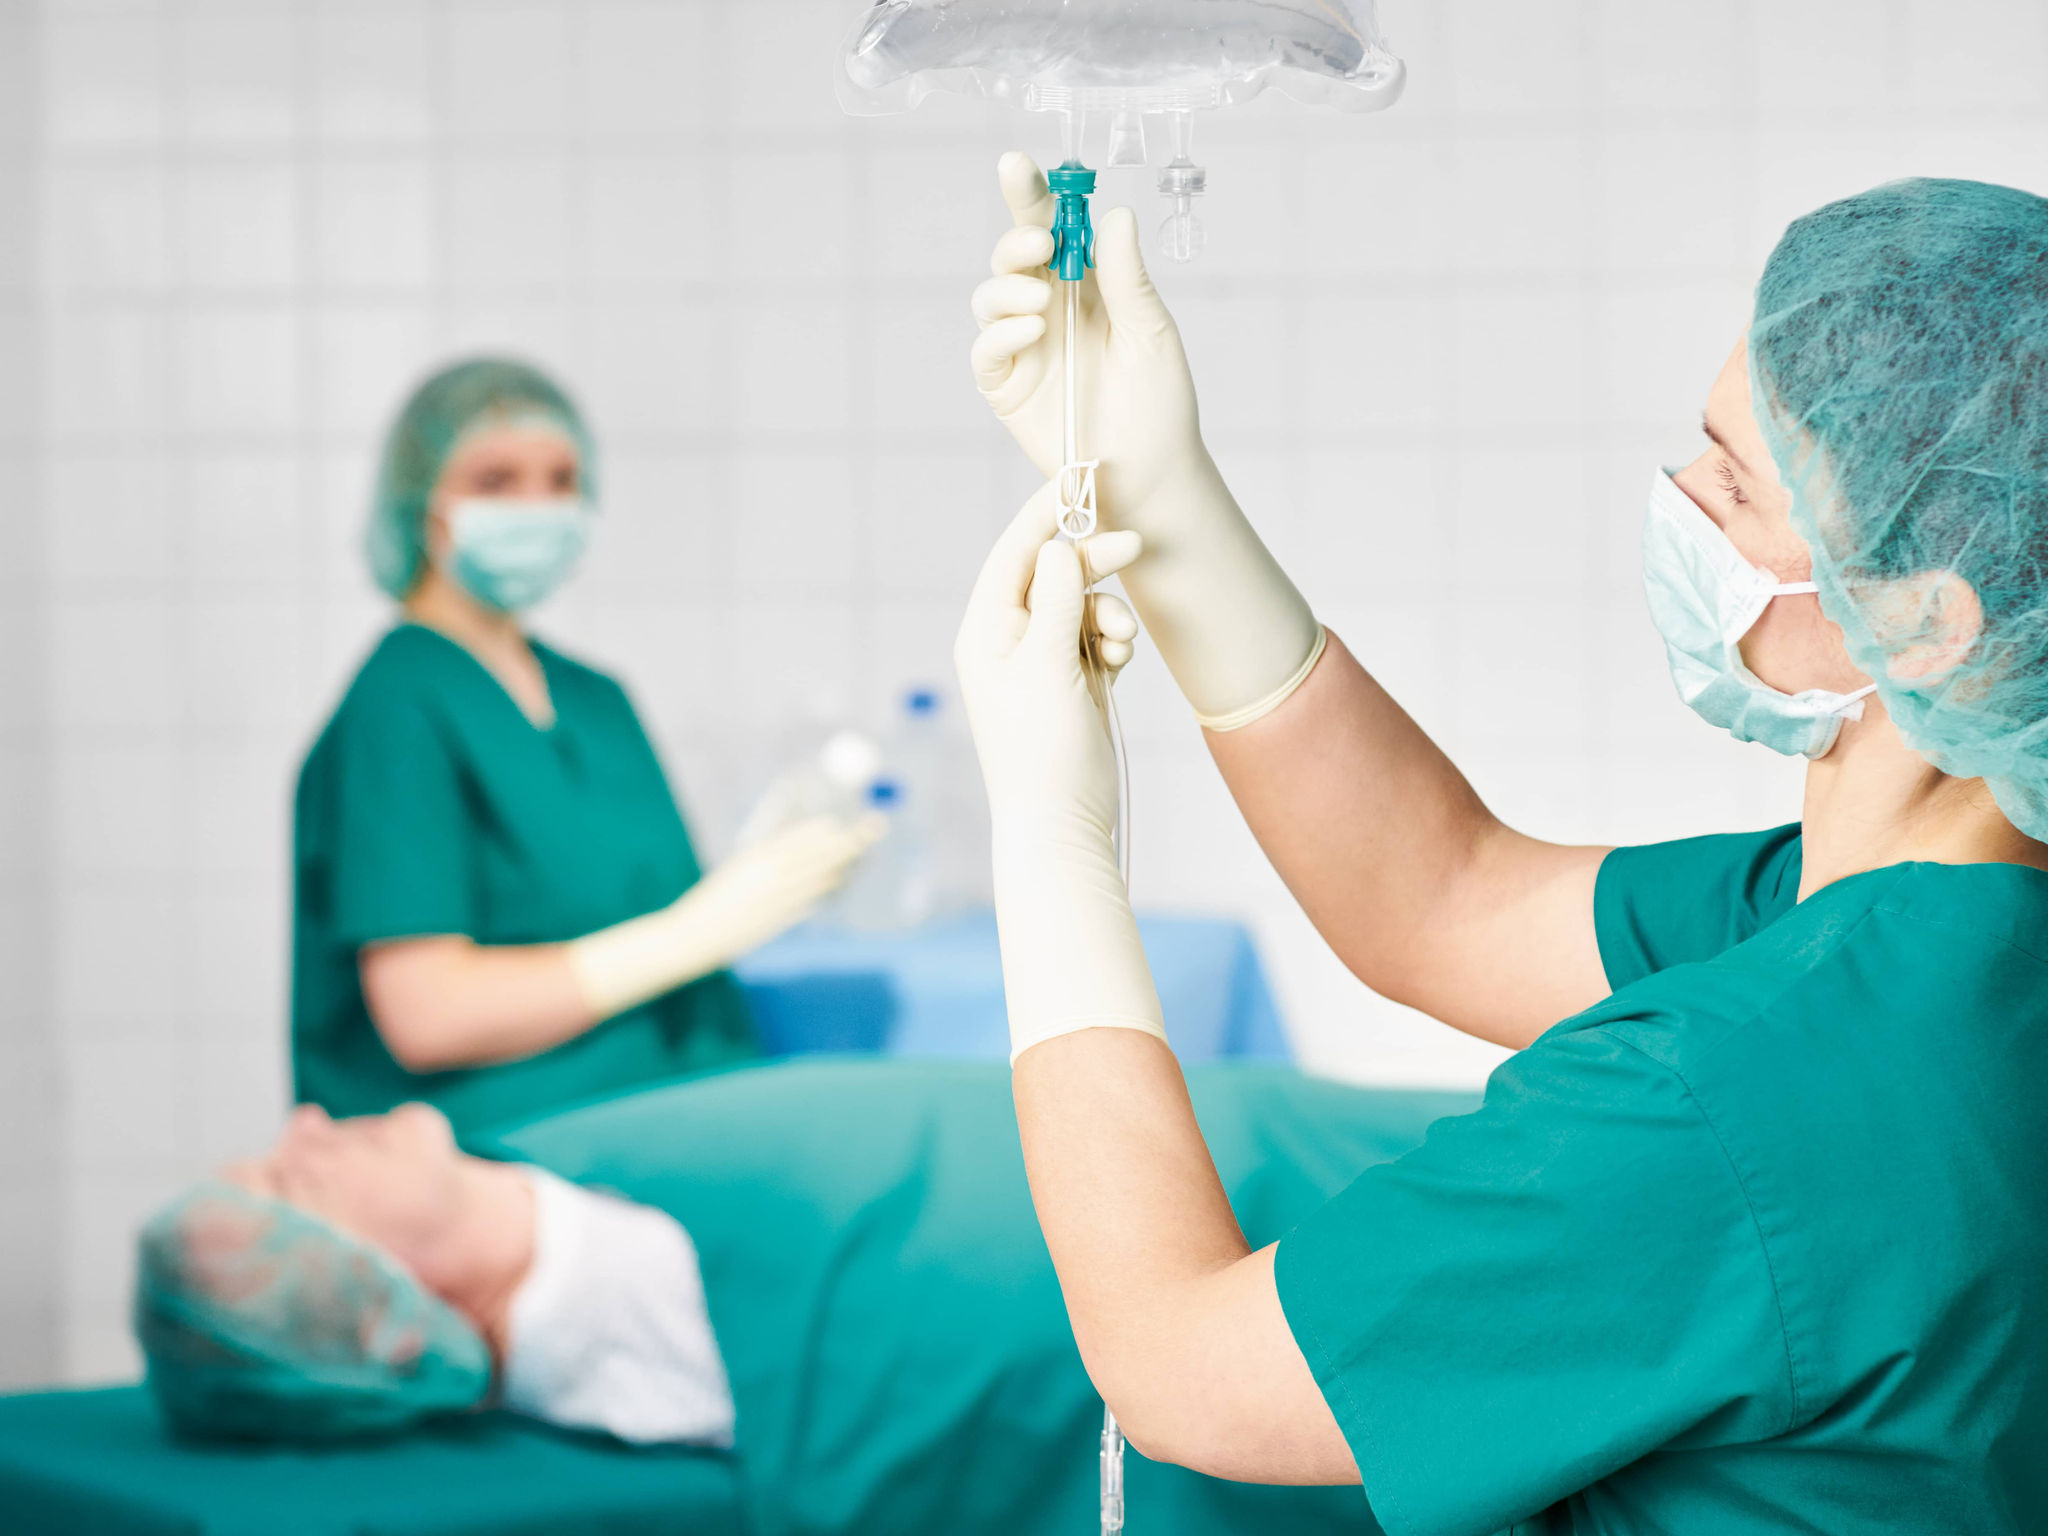 Nurse preparing 3 chamber bag in an operating room - patient lying in the background